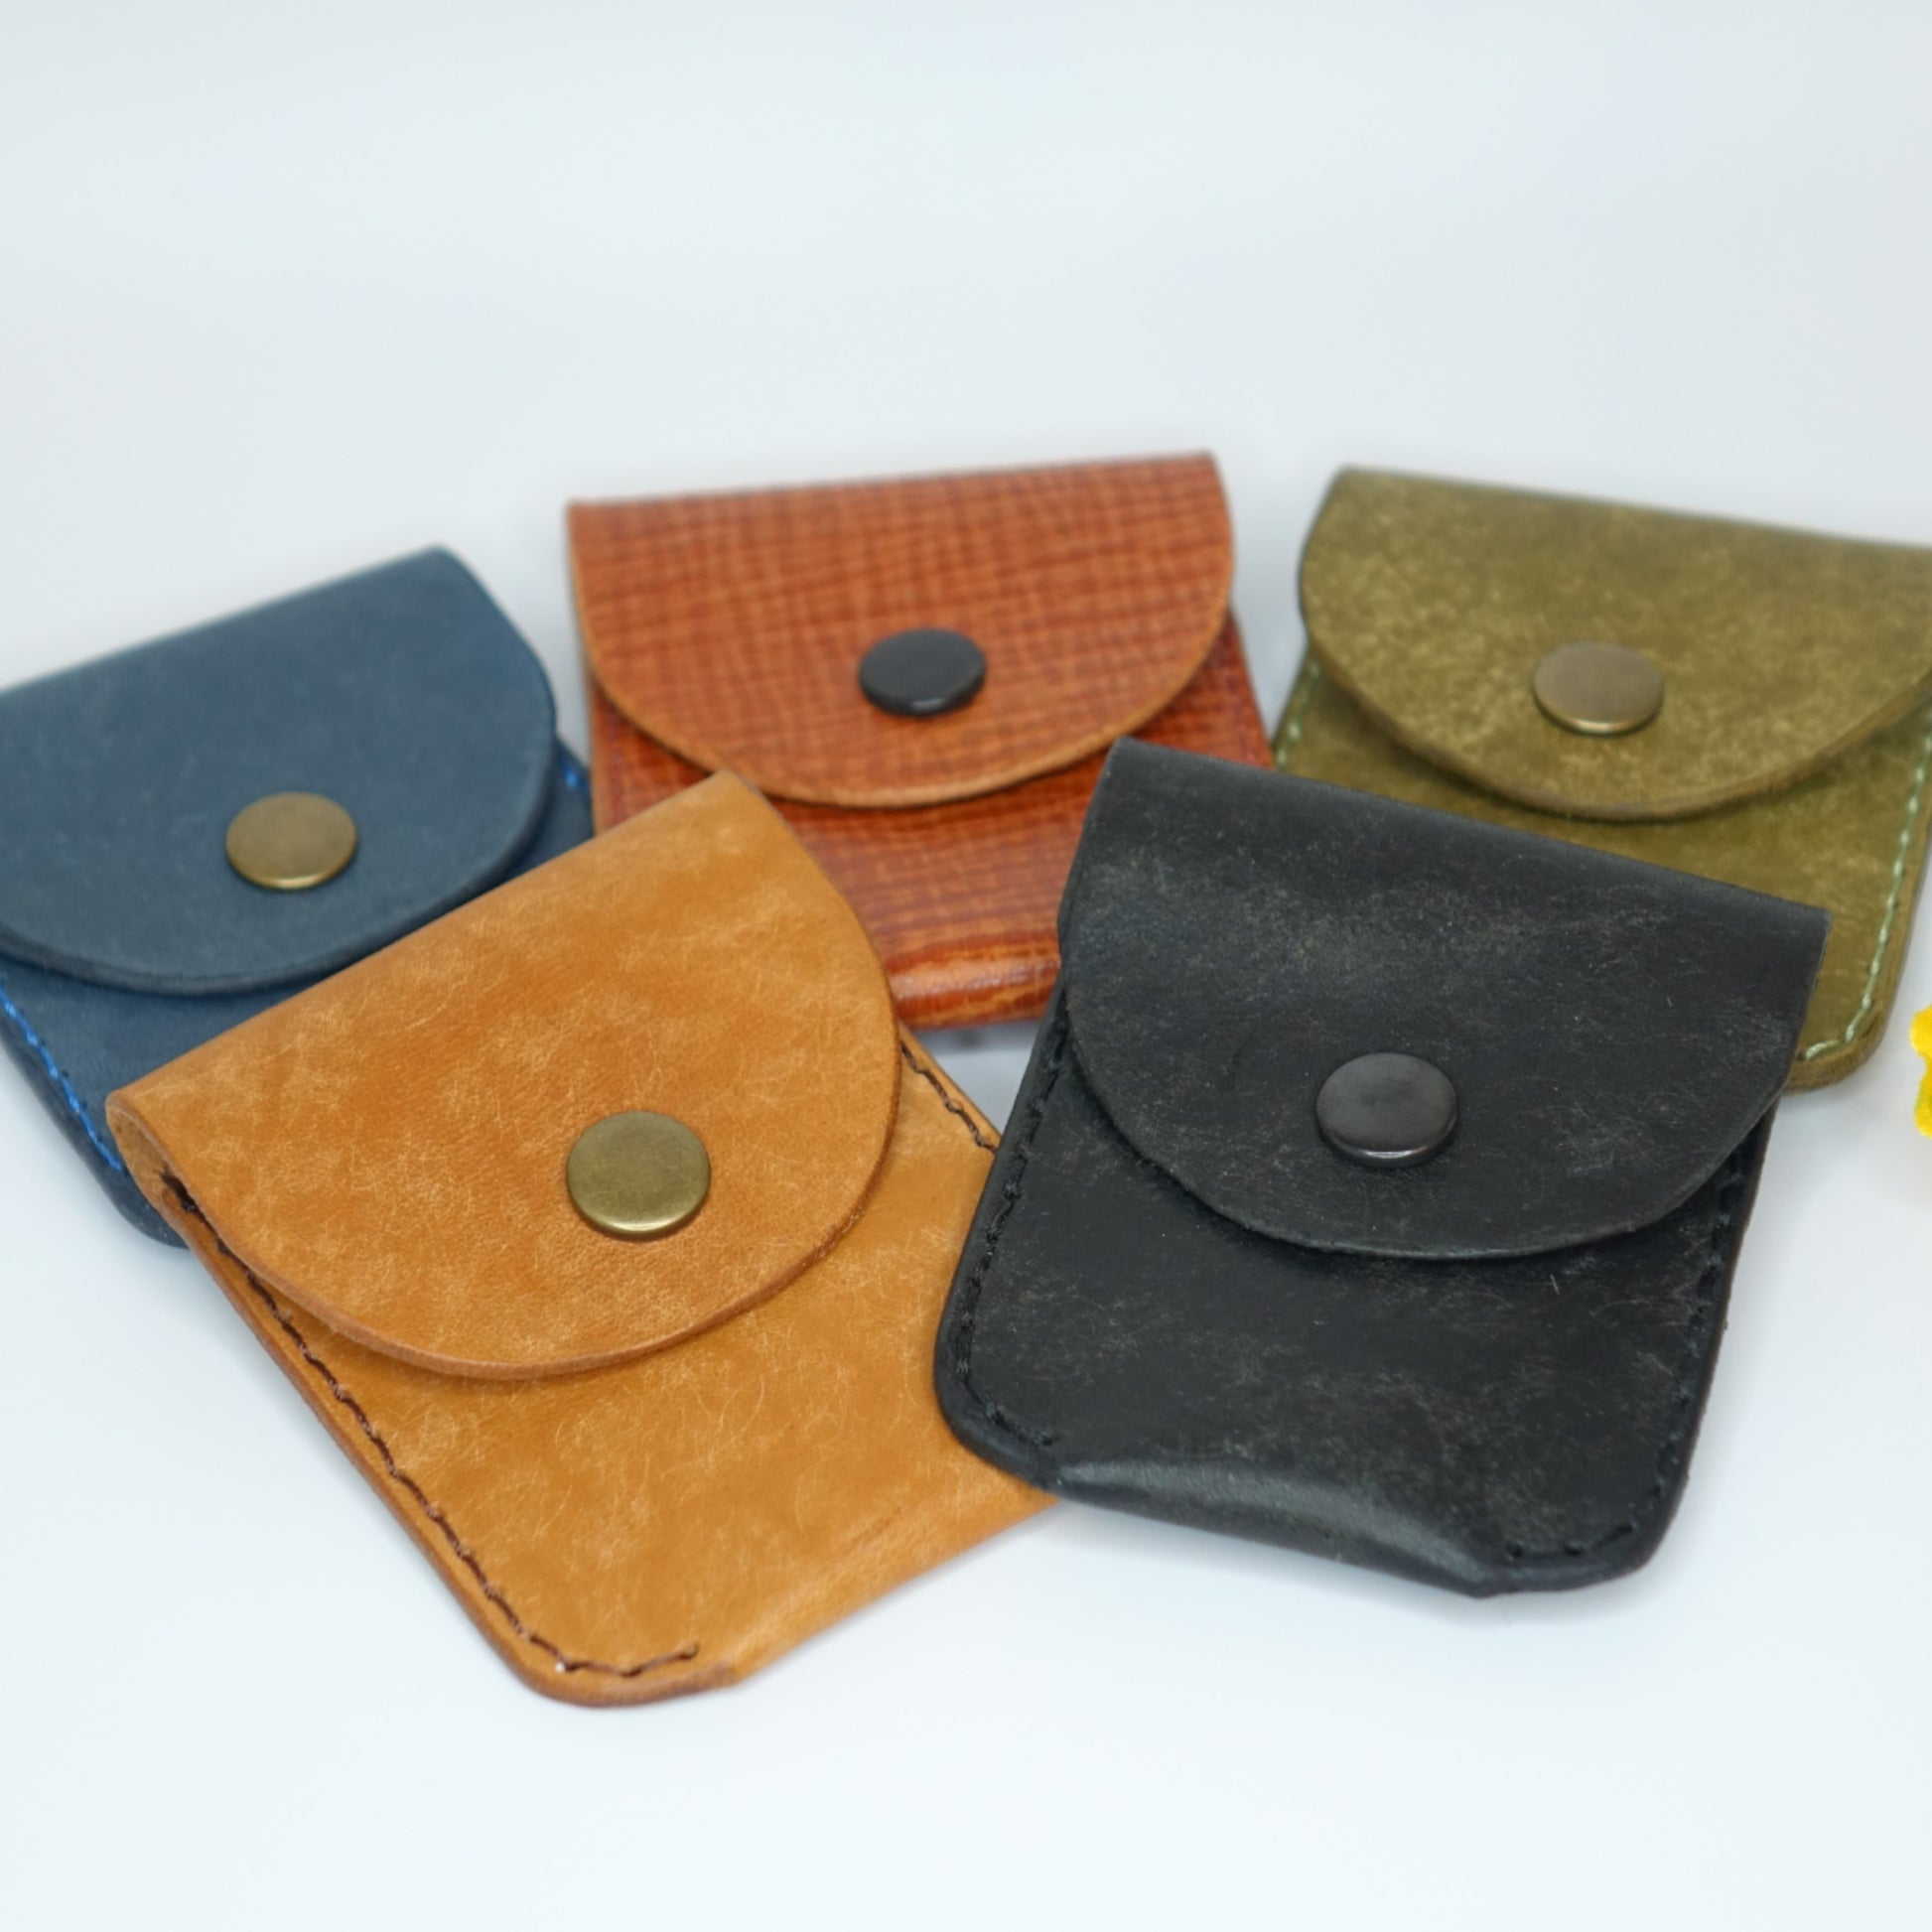 rgc handmade small leather coin purse wallet 7